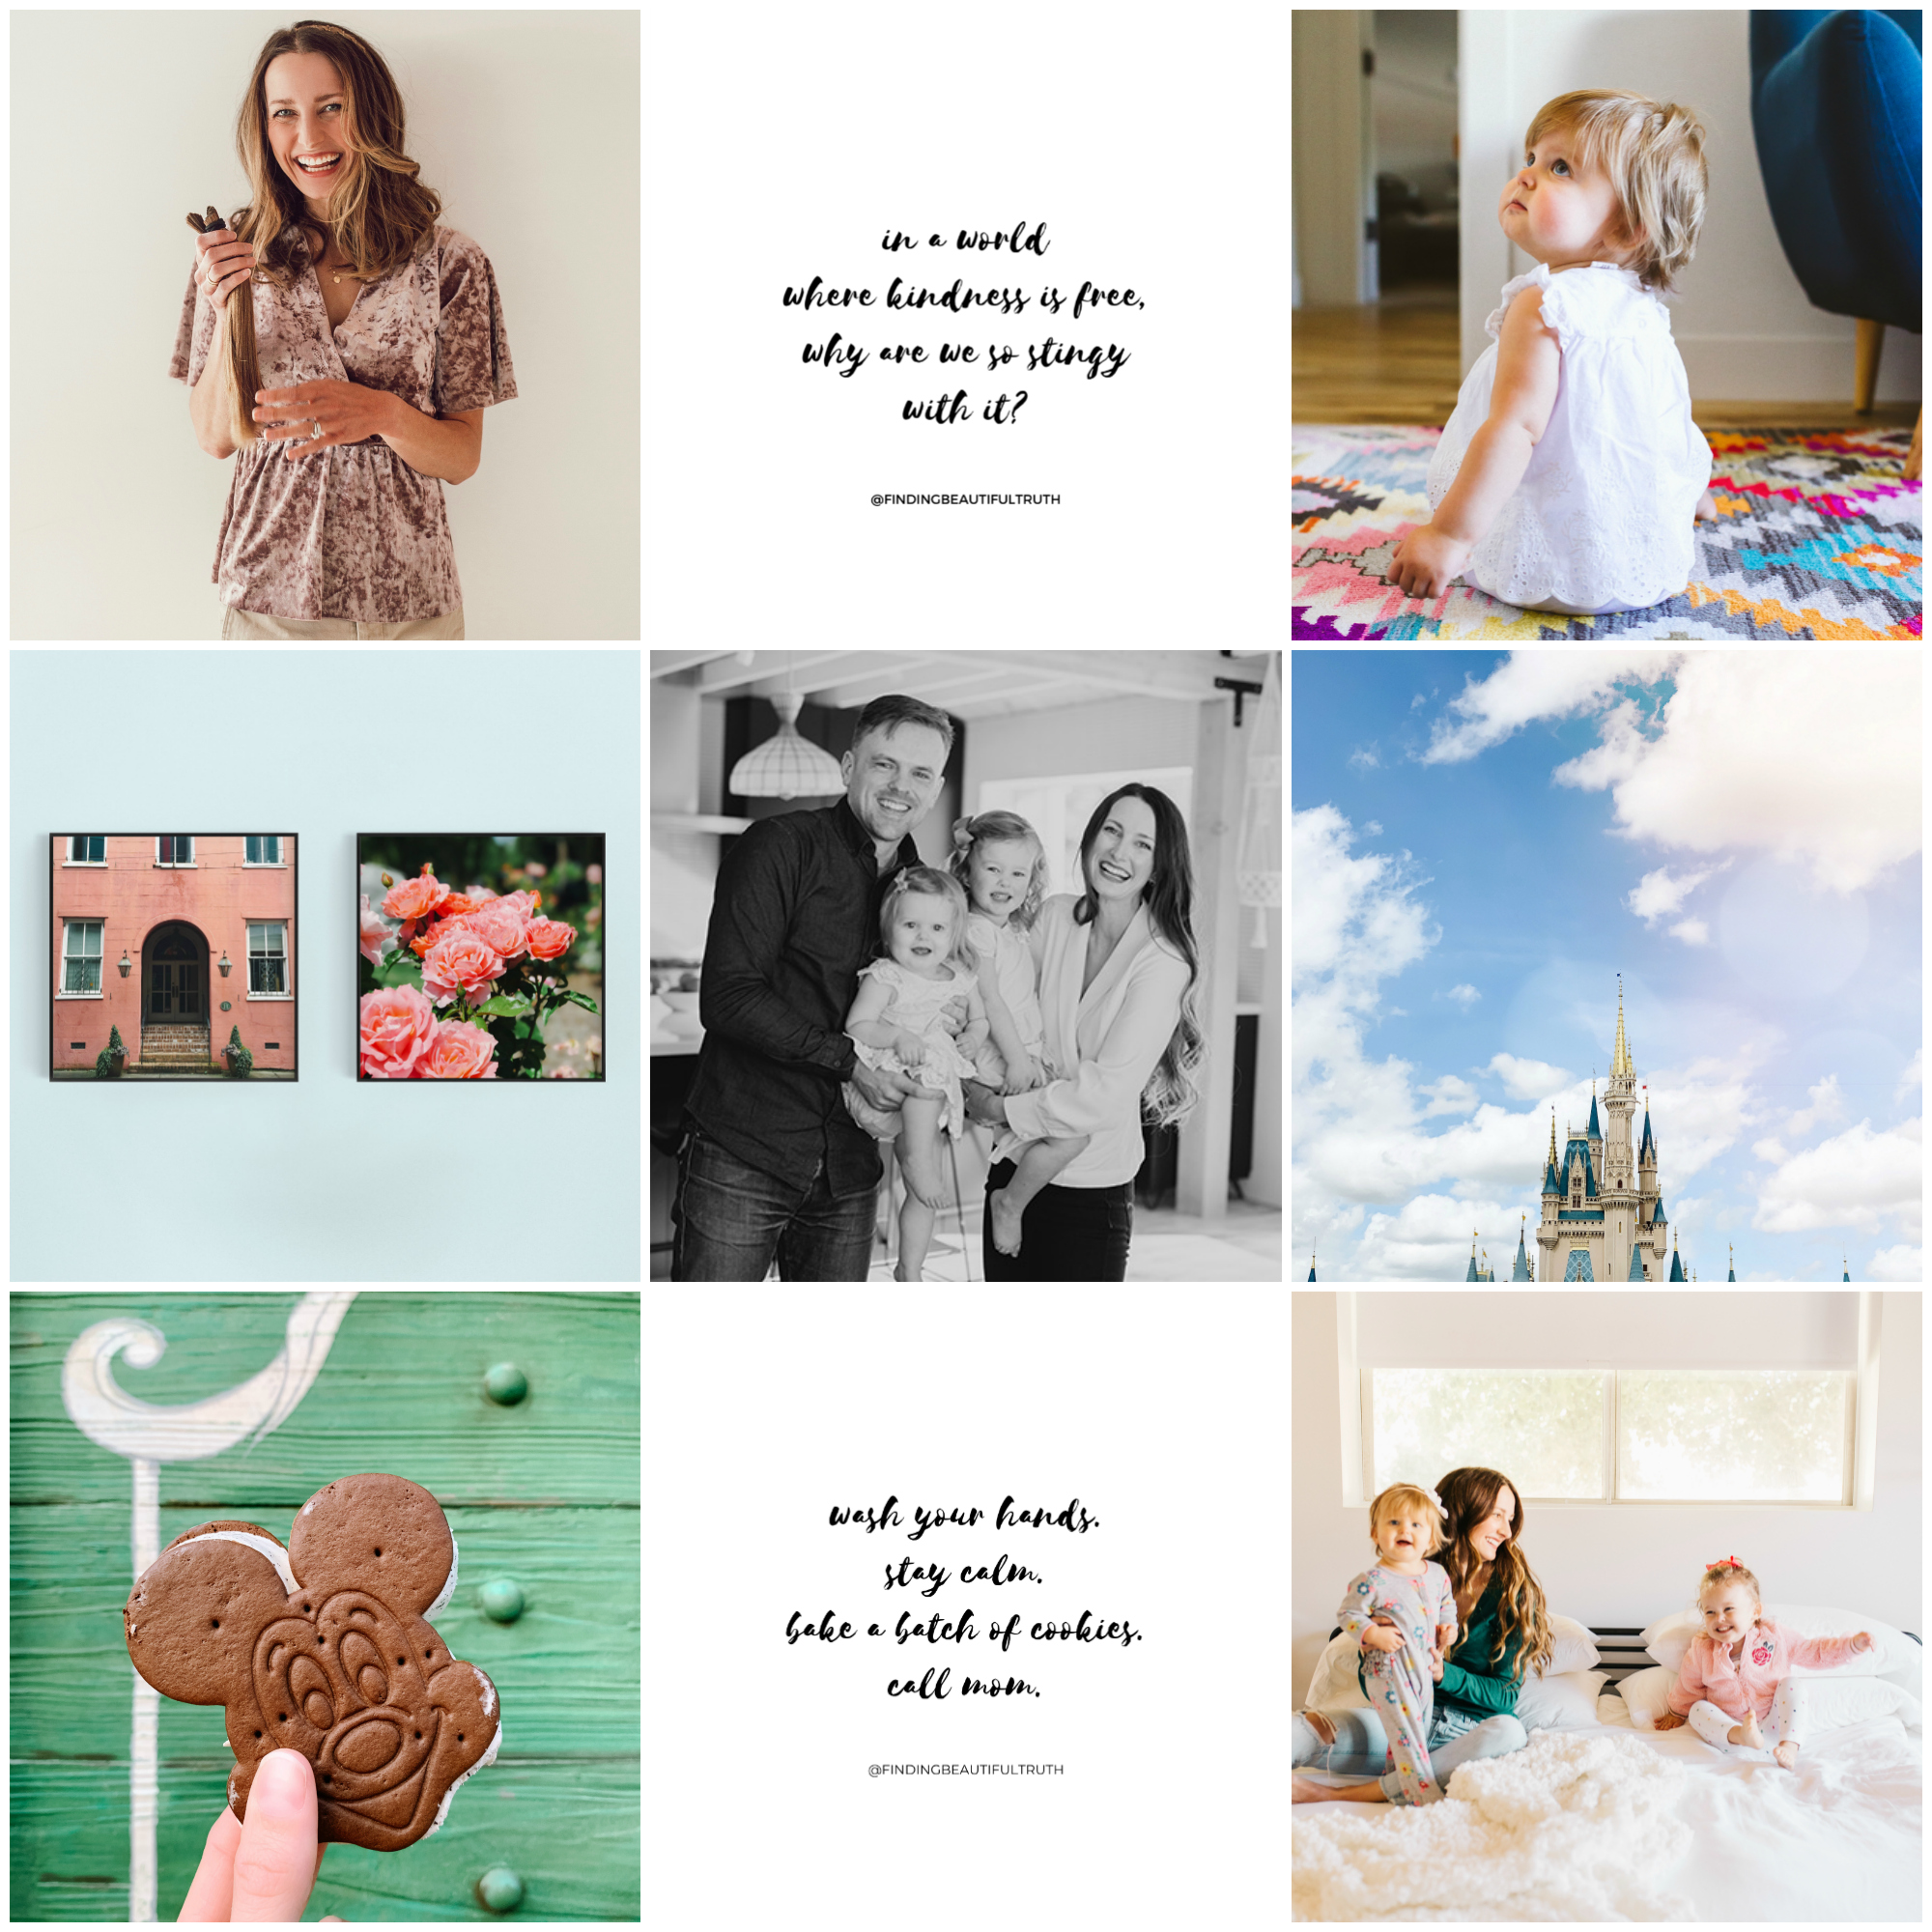 my march instagram life | latest snaps + instagram accounts I like following | Finding Beautiful Truth